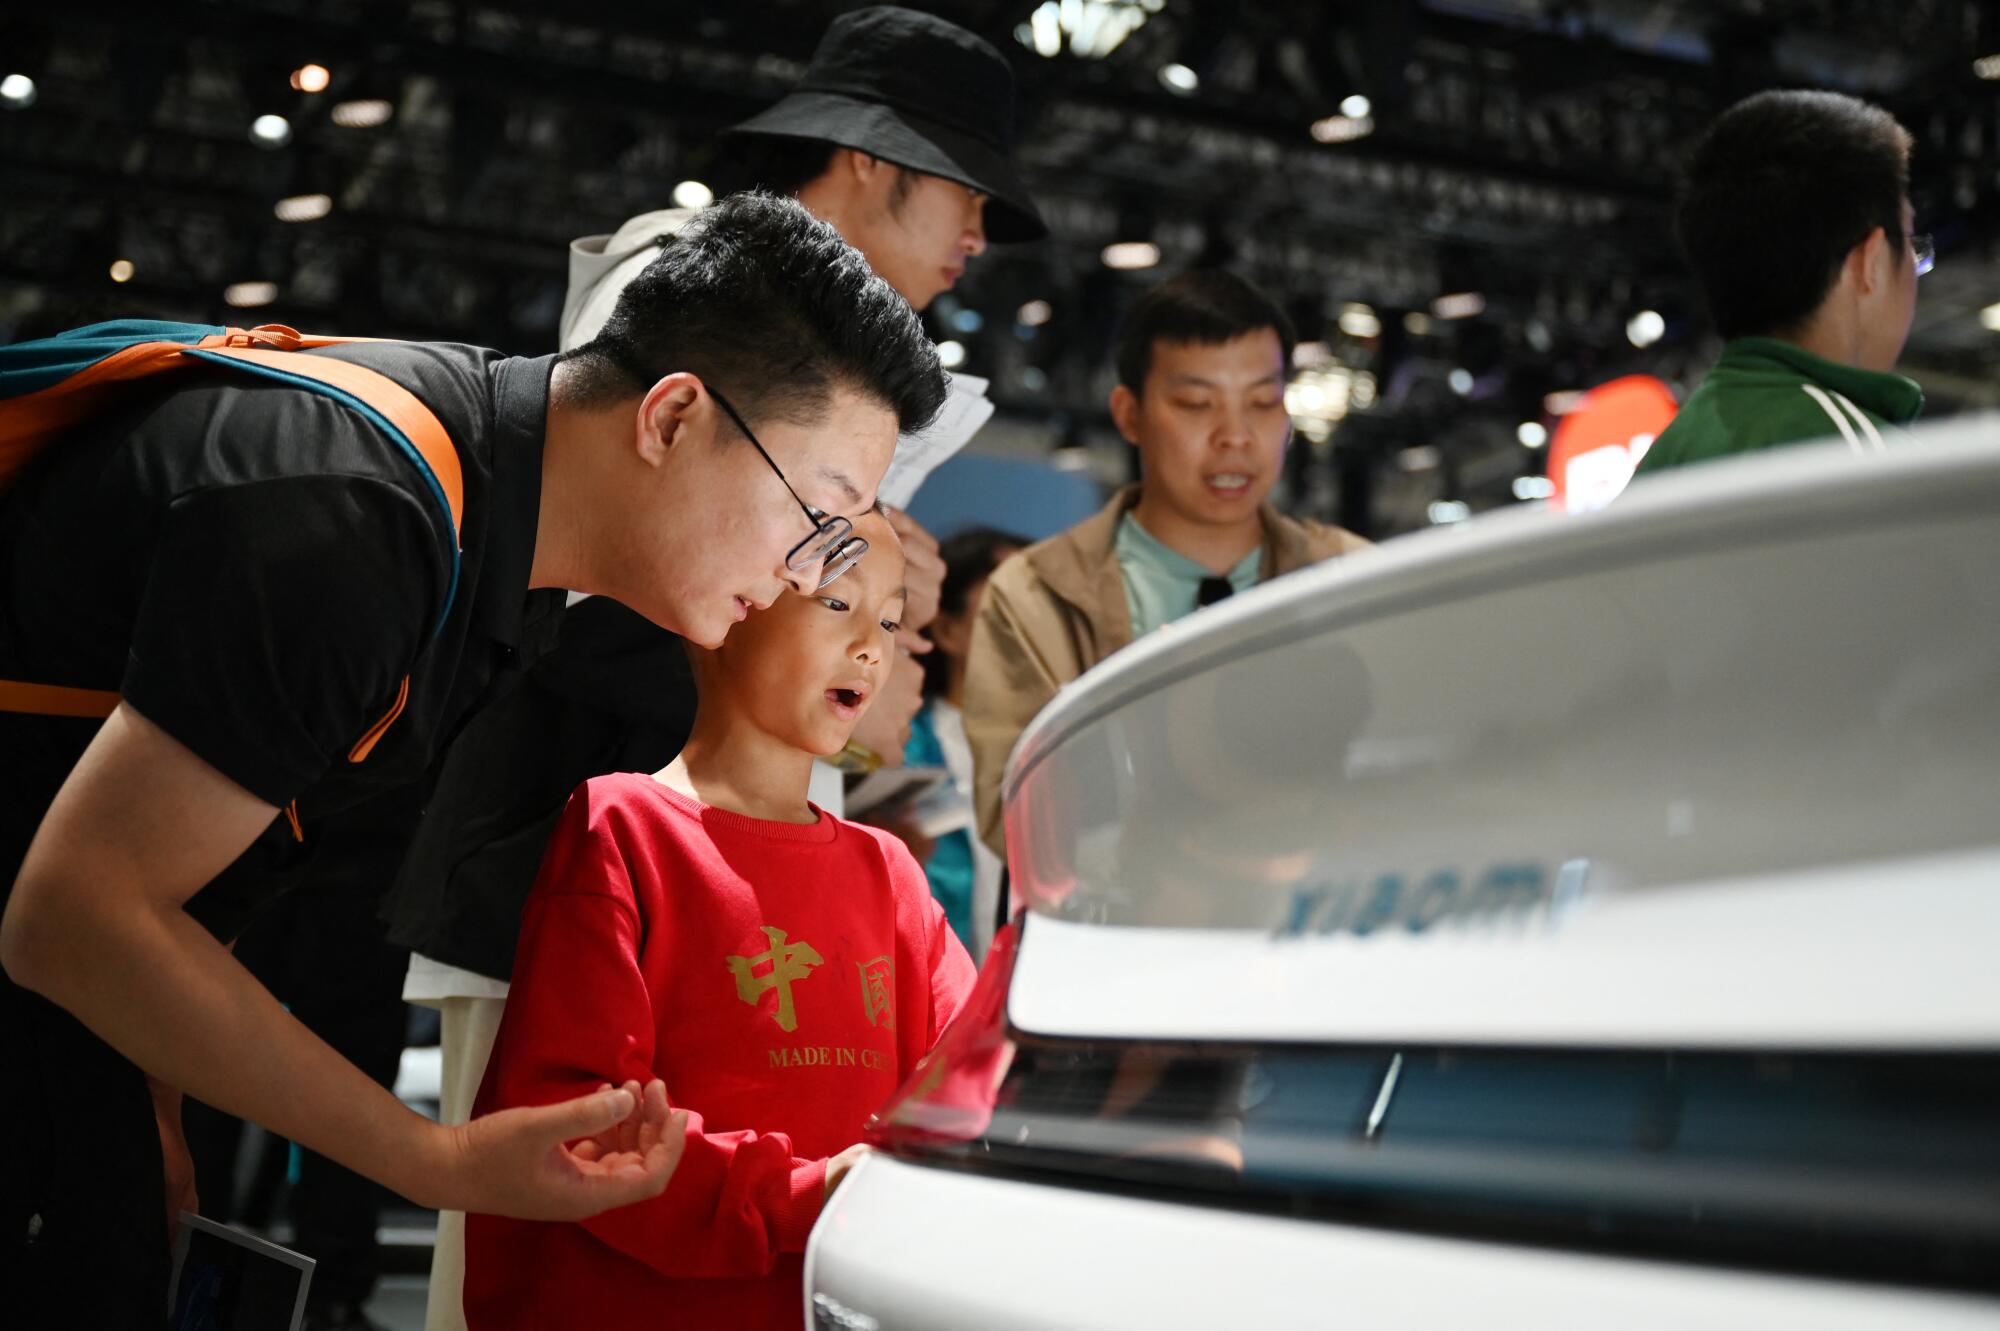 A person in a dark shirt and glasses leans next to a boy in a red t-shirt looking at a vehicle. 